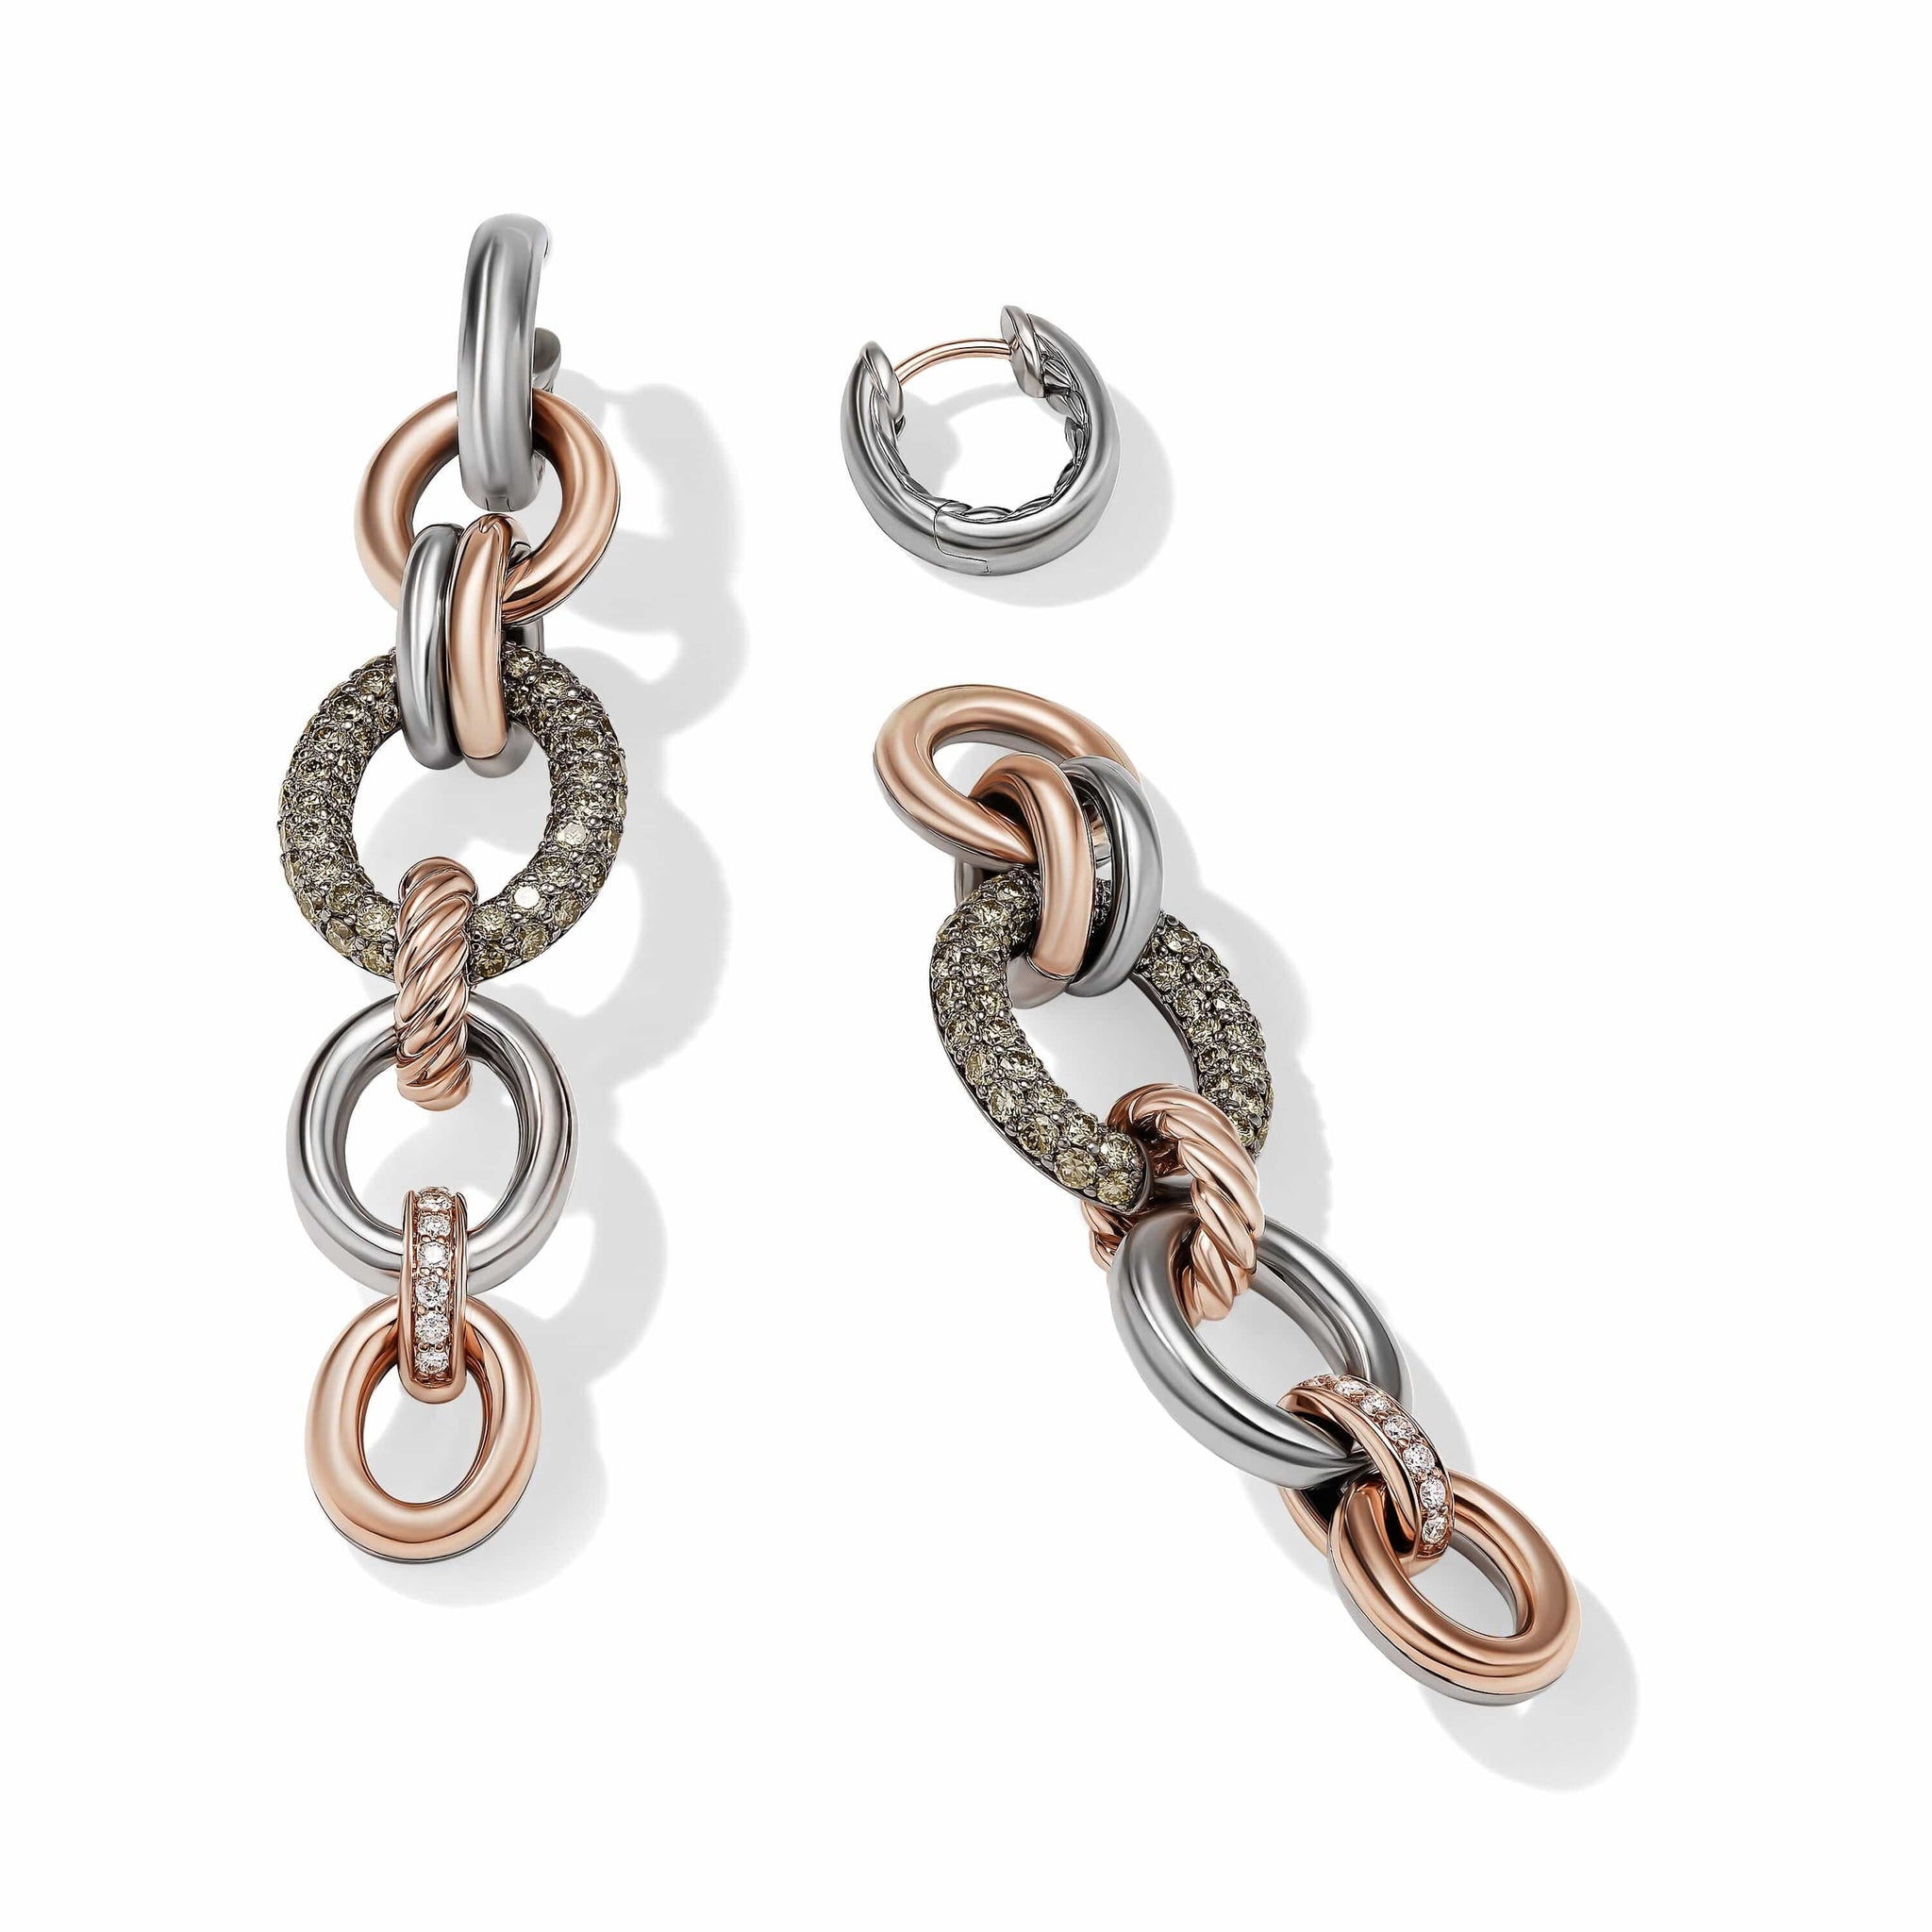 DY Mercer™ Linked Melange Drop Earrings in Sterling Silver with 18K Rose Gold and Pavé Cognac Diamonds